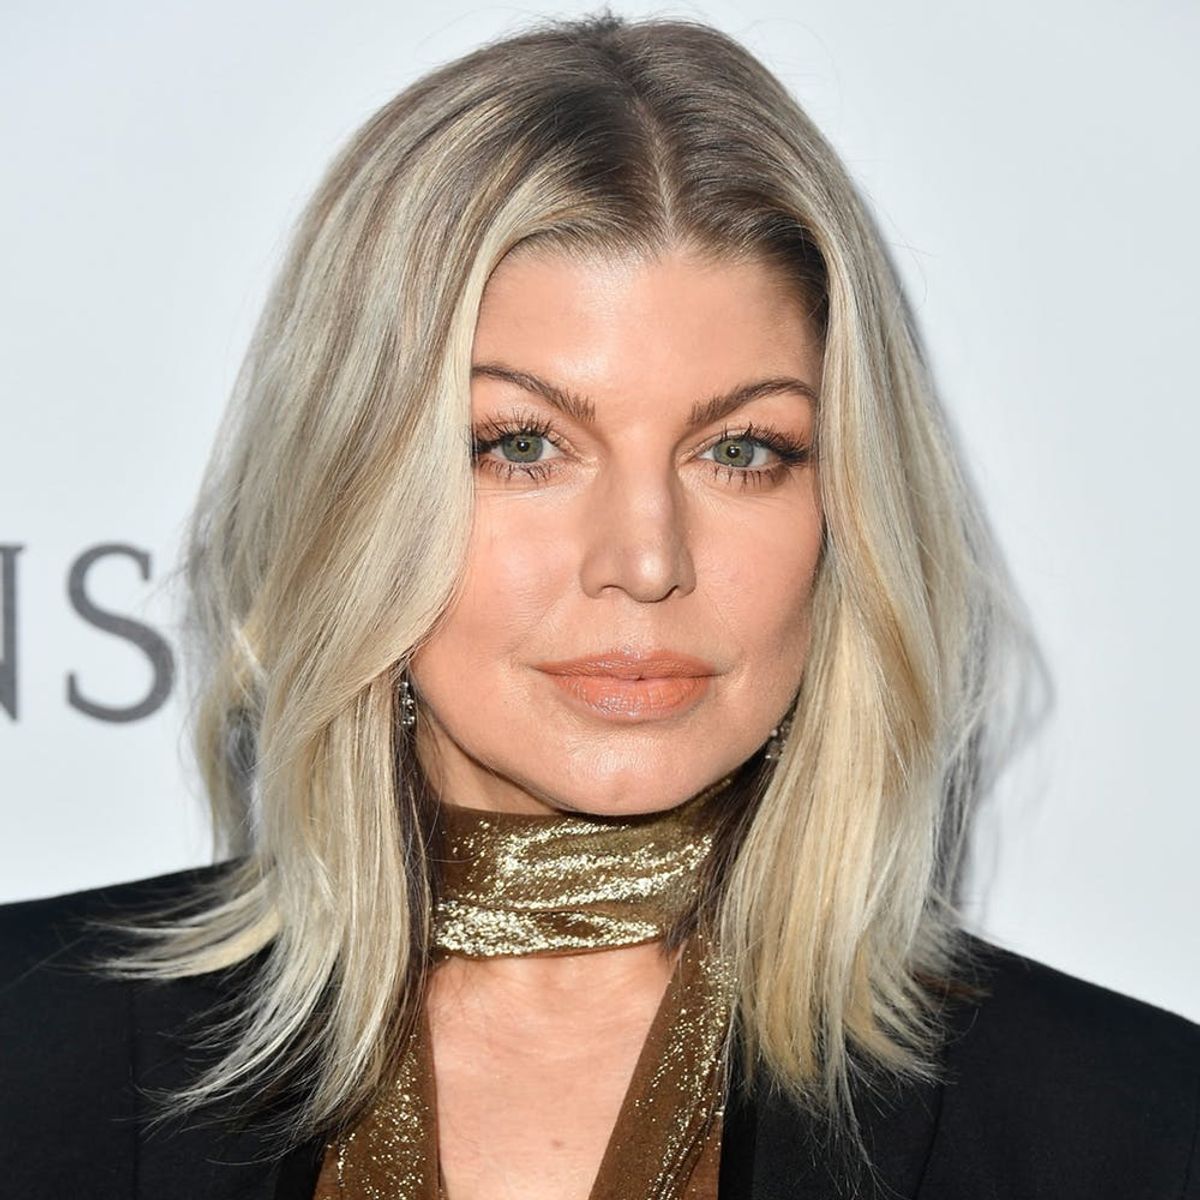 Fergie Gets Emotional Talking About Josh Duhamel: “I Wanted to Stay Married Forever”